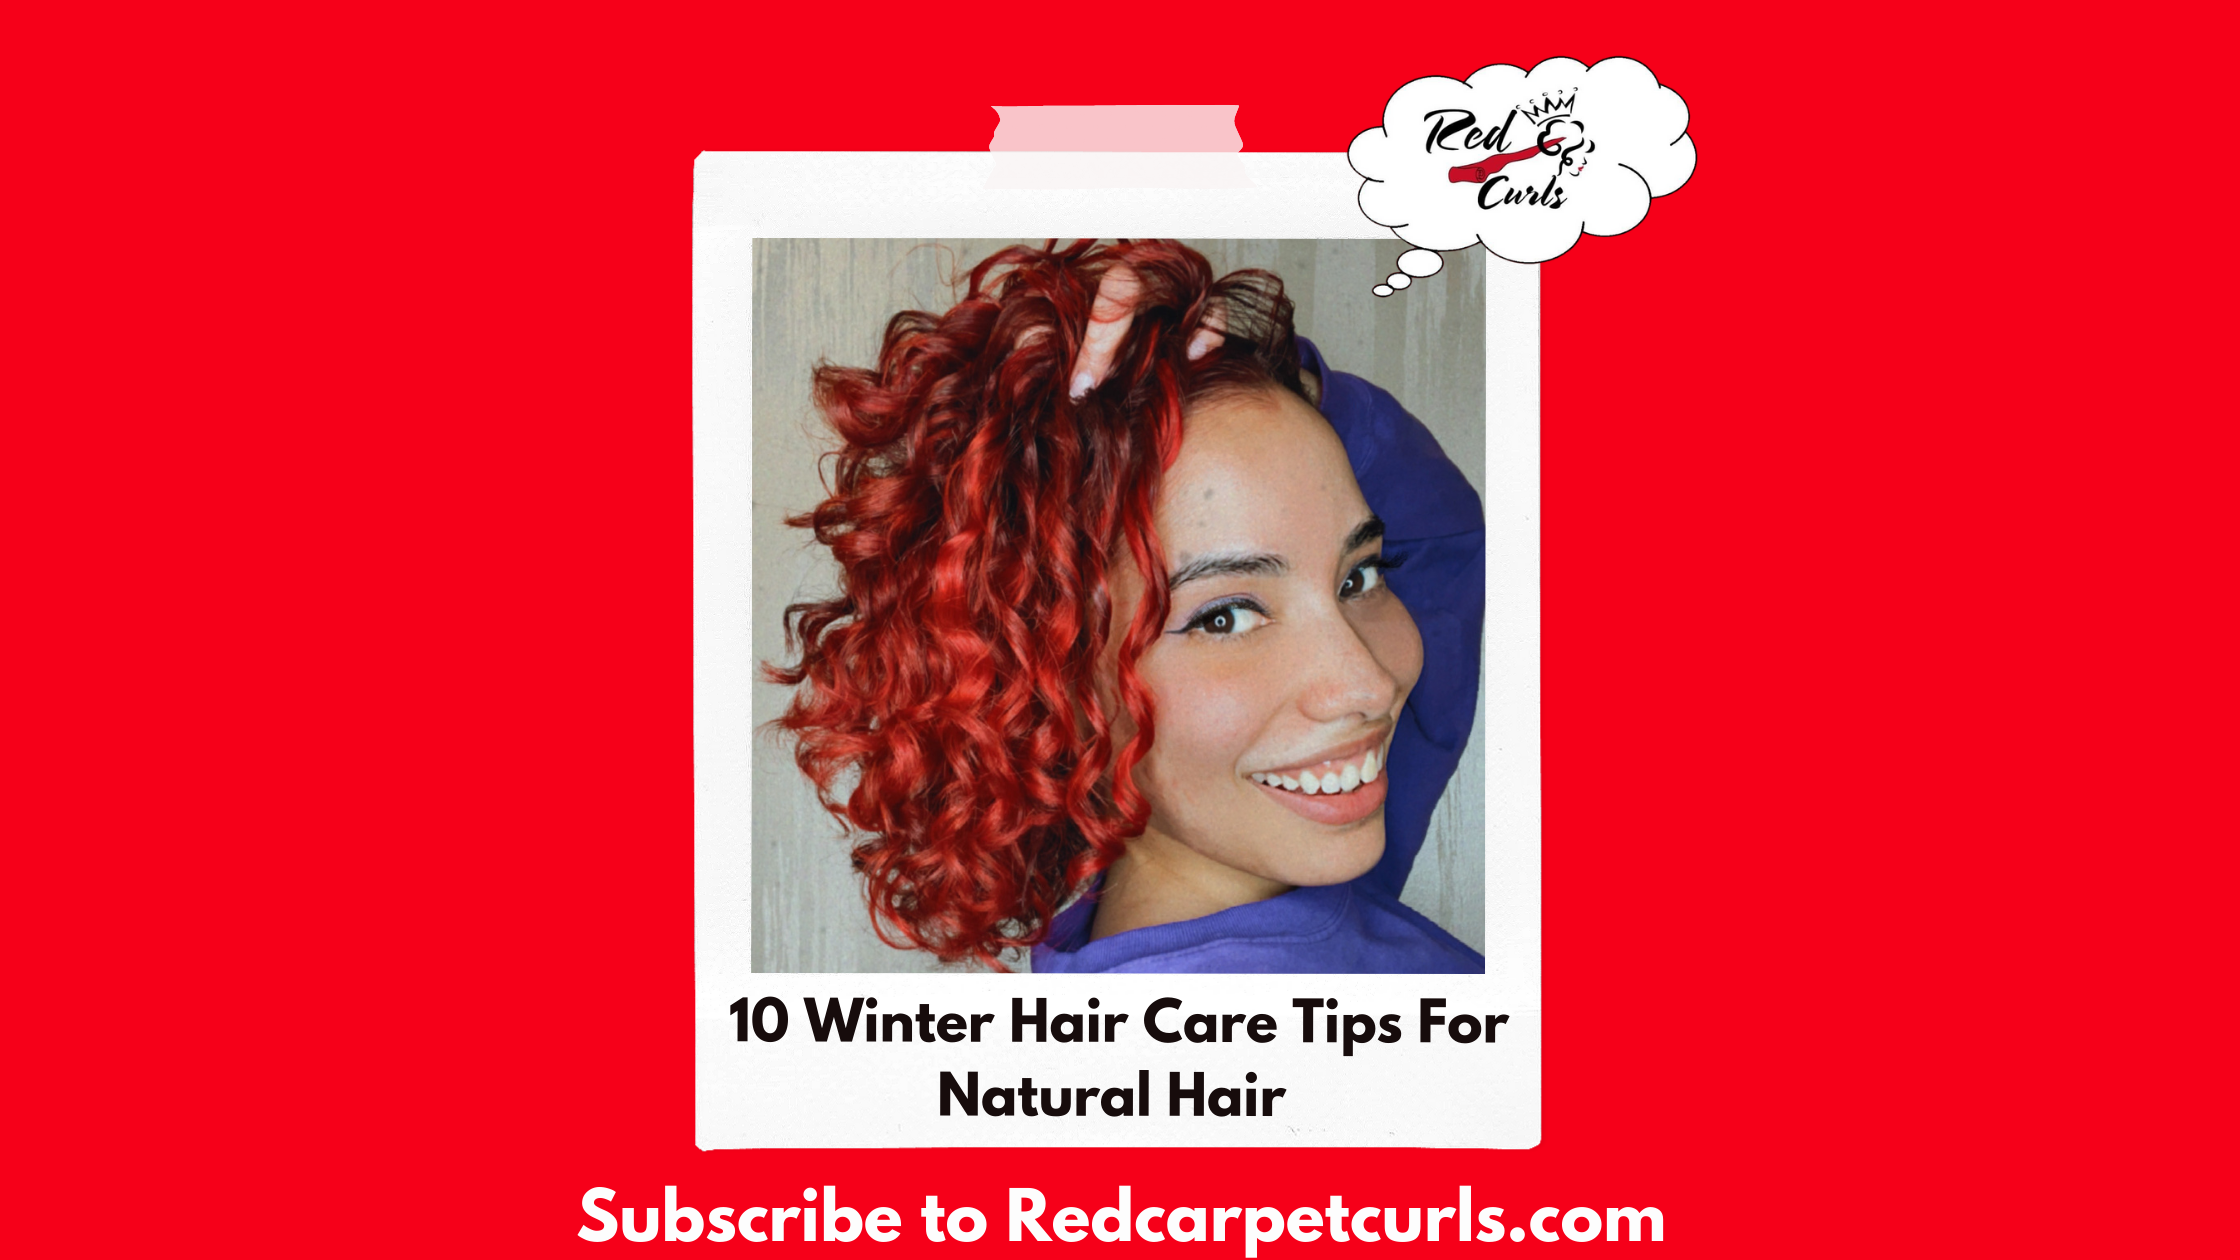 10 Winter Hair Care Tips For Natural Hair – Red Carpet Curls